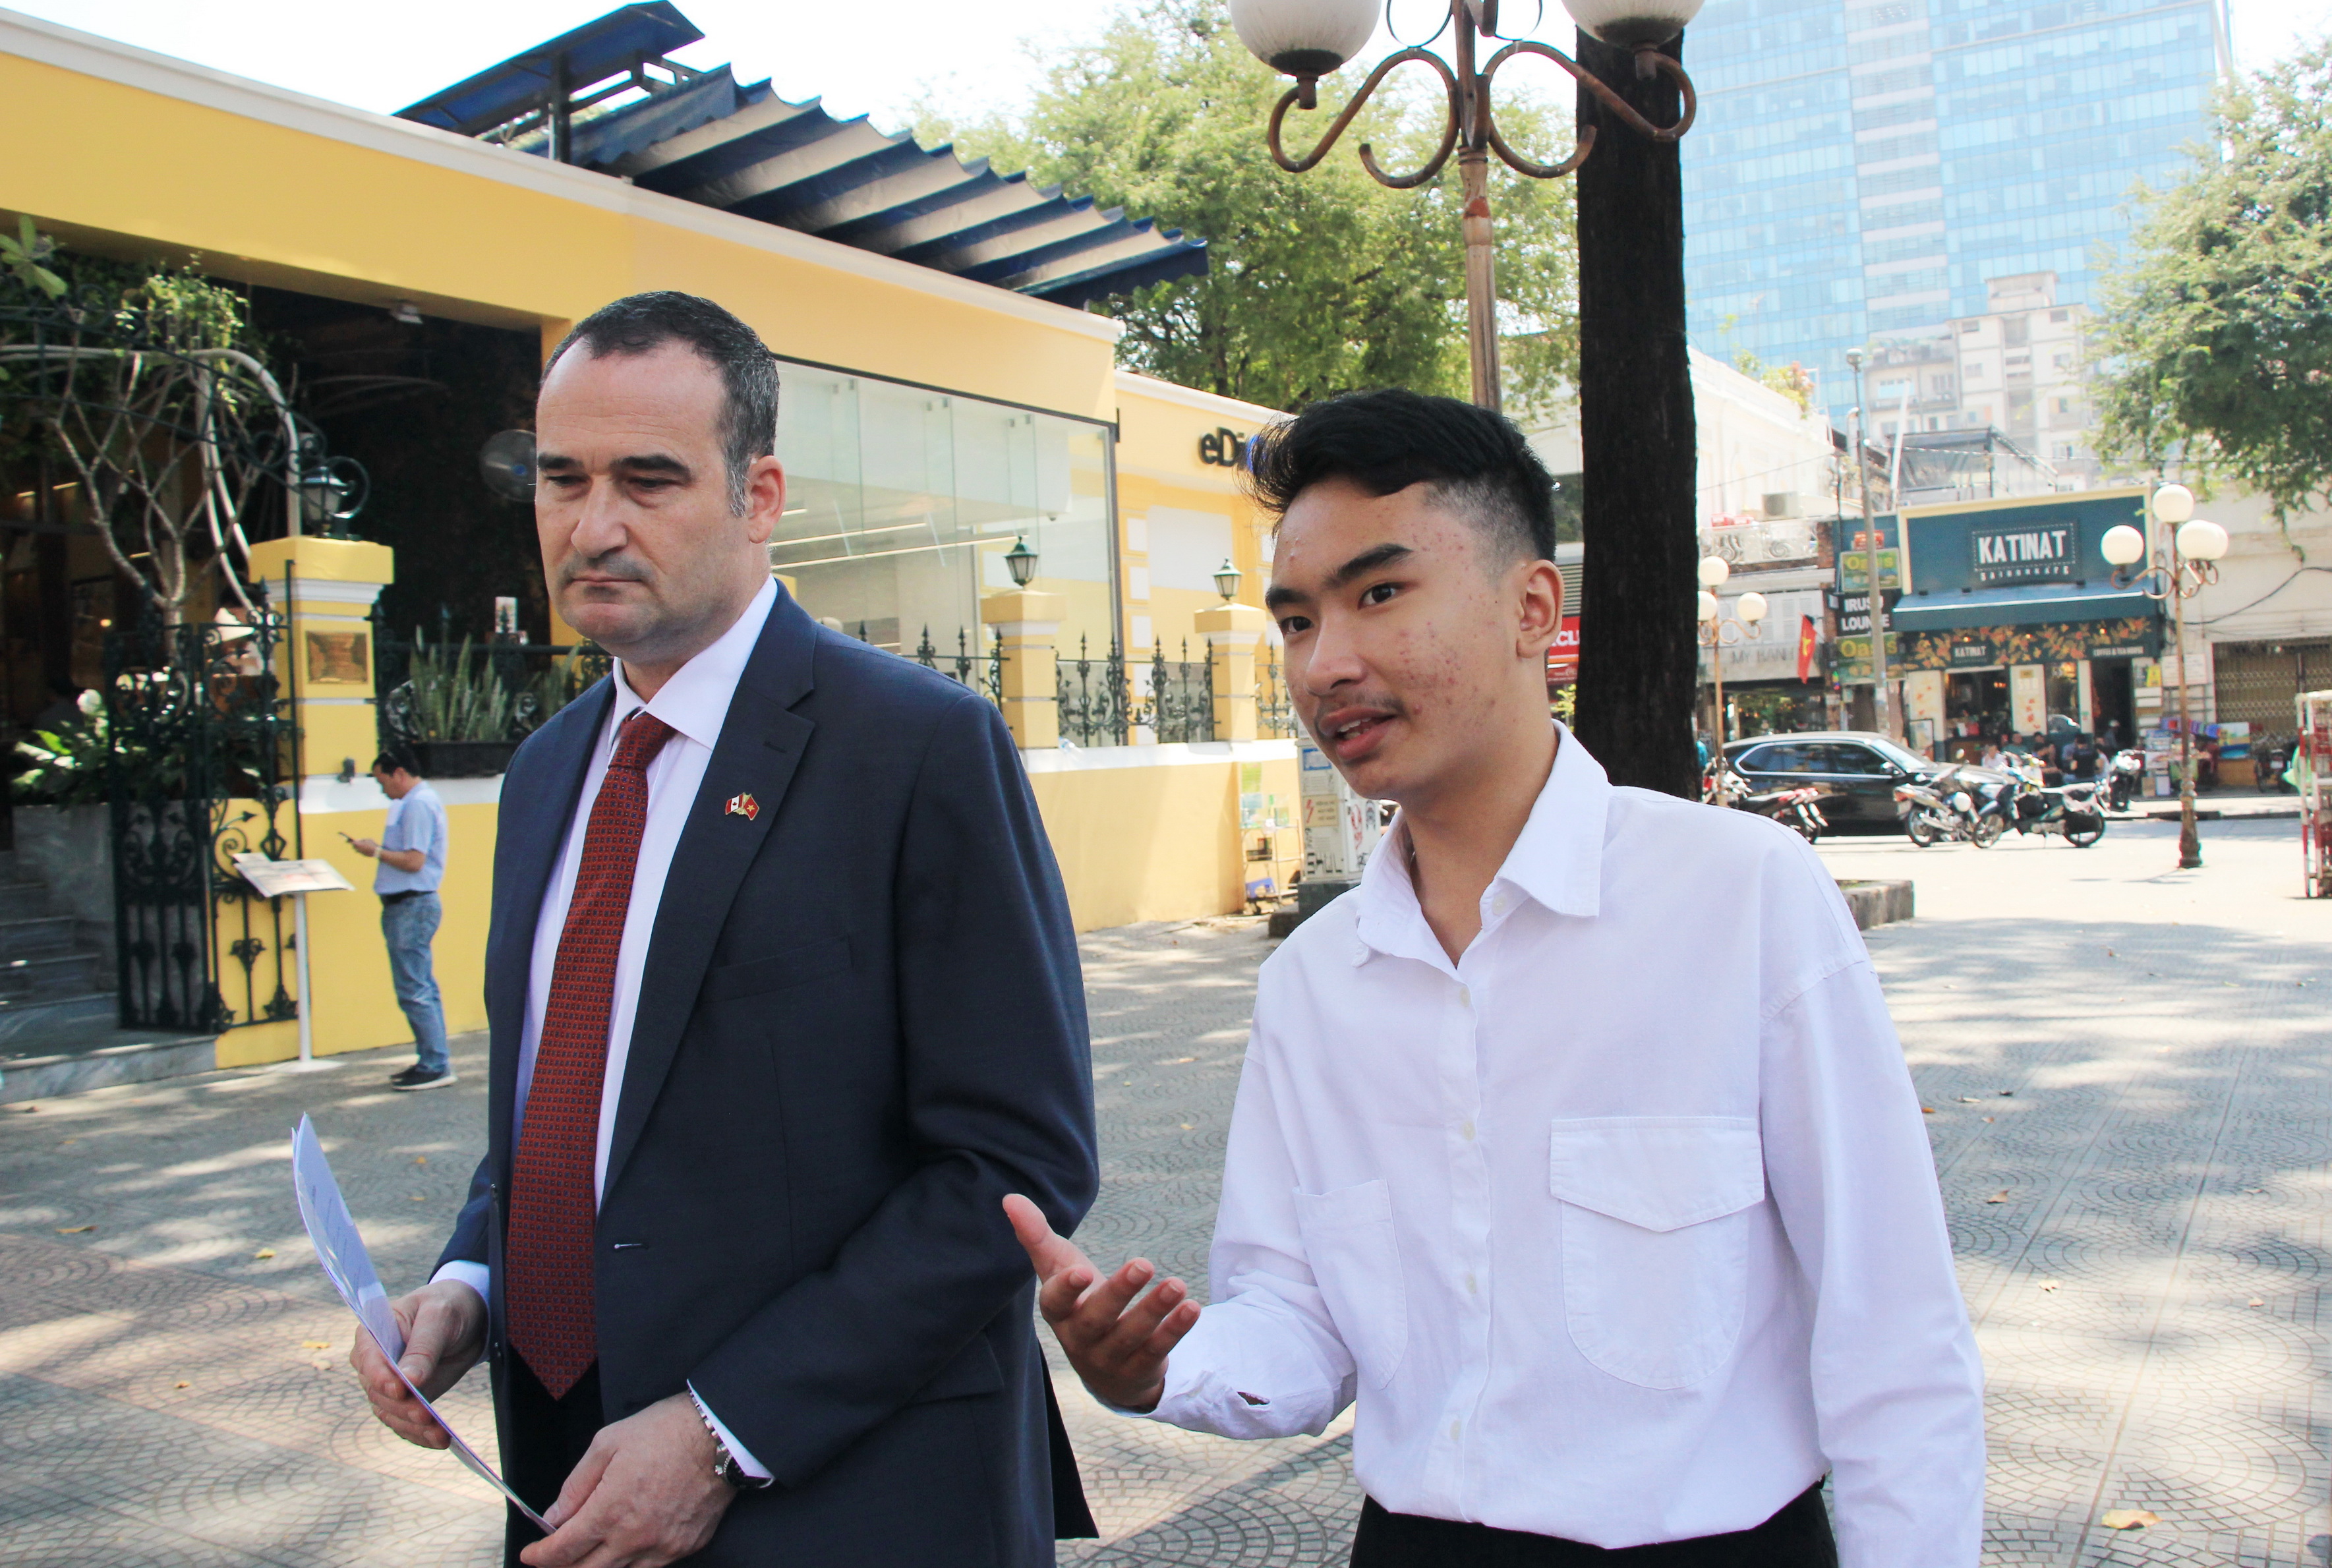 Ninth grader Le Huy Tuan, winner of “Consul General for a Day” competition, talks to Canadian Consul General Kyle Nunas while the two walk on the street in Ho Chi Minh City on February 19, 2020. Photo: Dong Nguyen/Tuoi Tre News